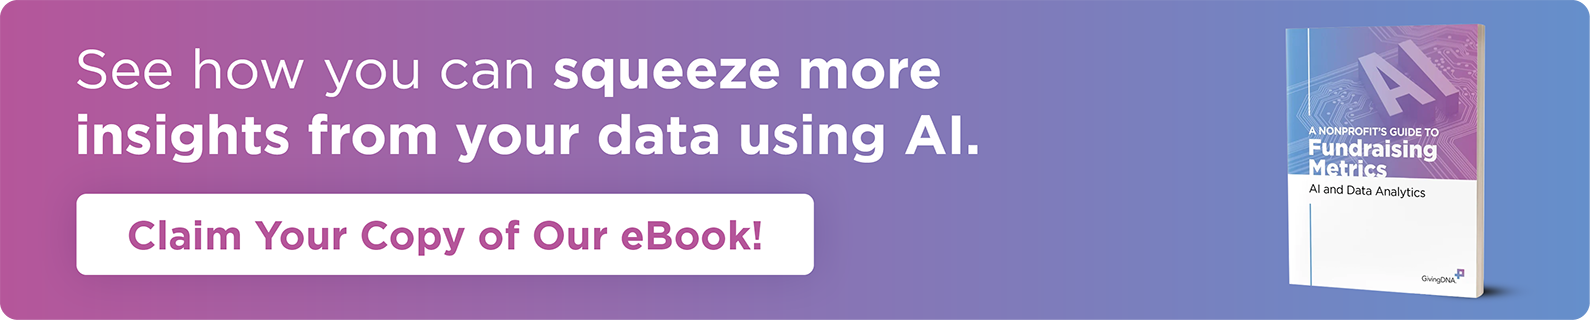 See how you can squeeze more insights from your data using AI. Claim your copy of our eBook!